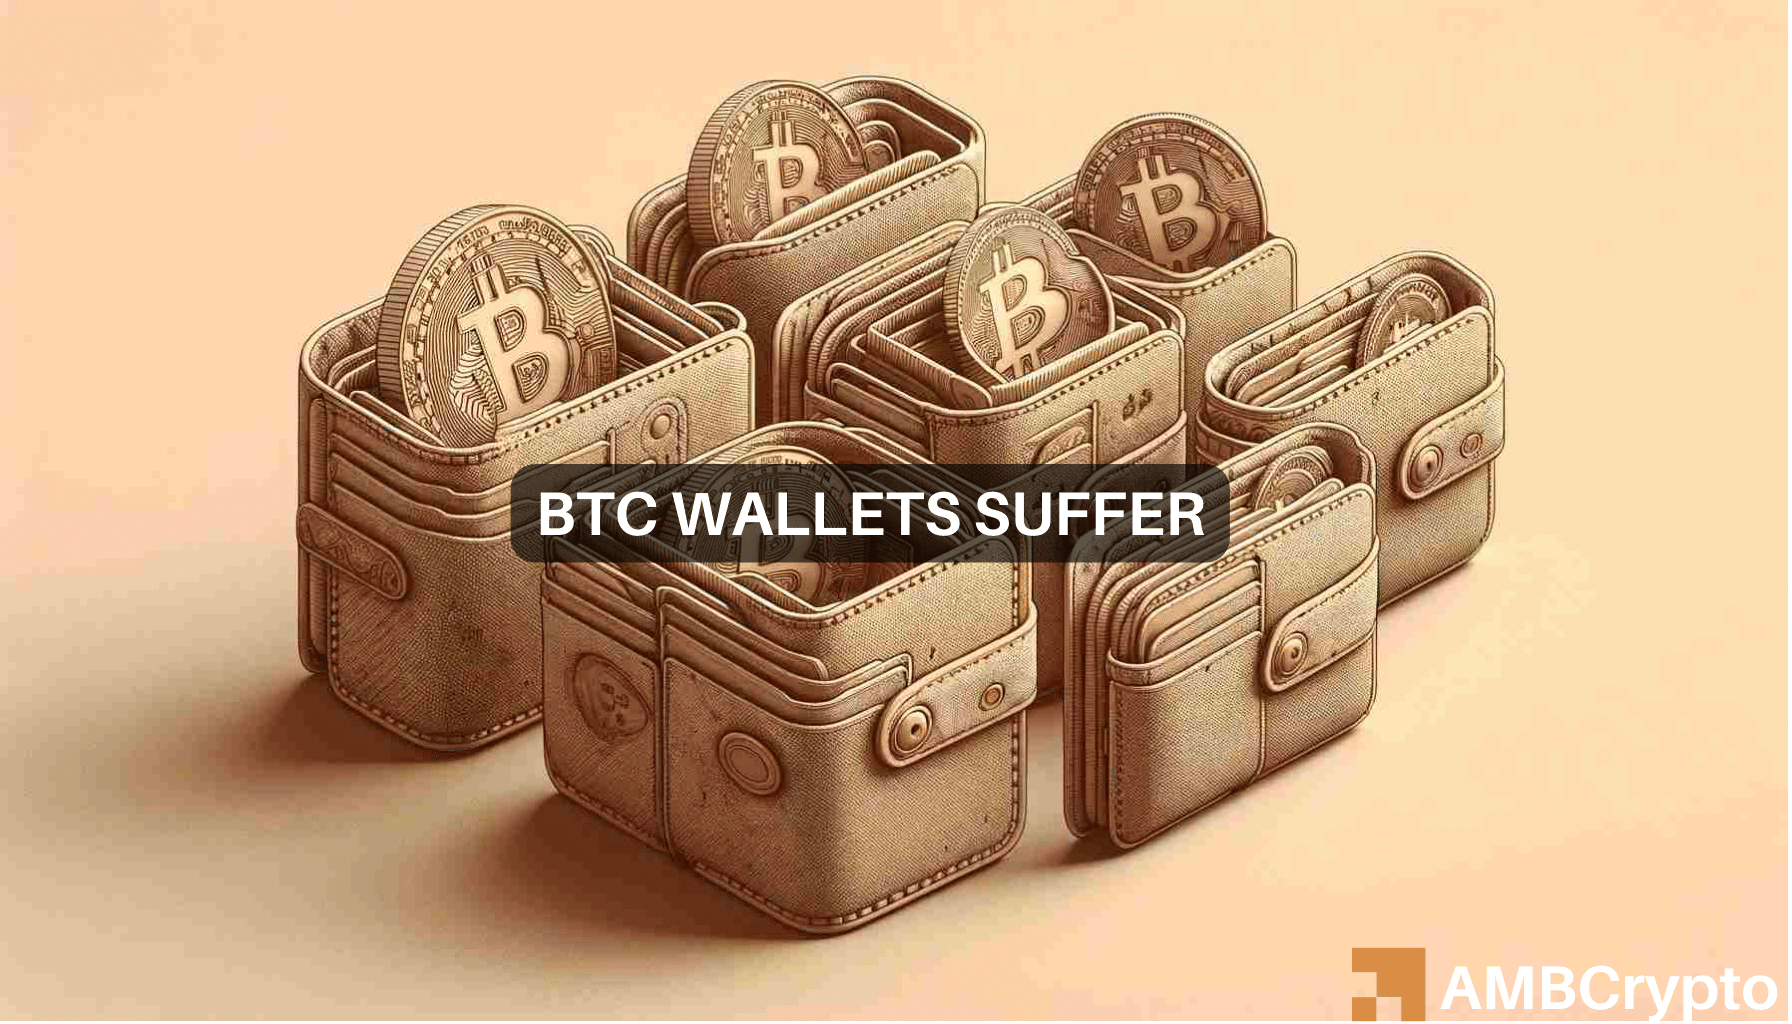 New Bitcoin wallets hit 4-year low: Decoding what it means for BTC